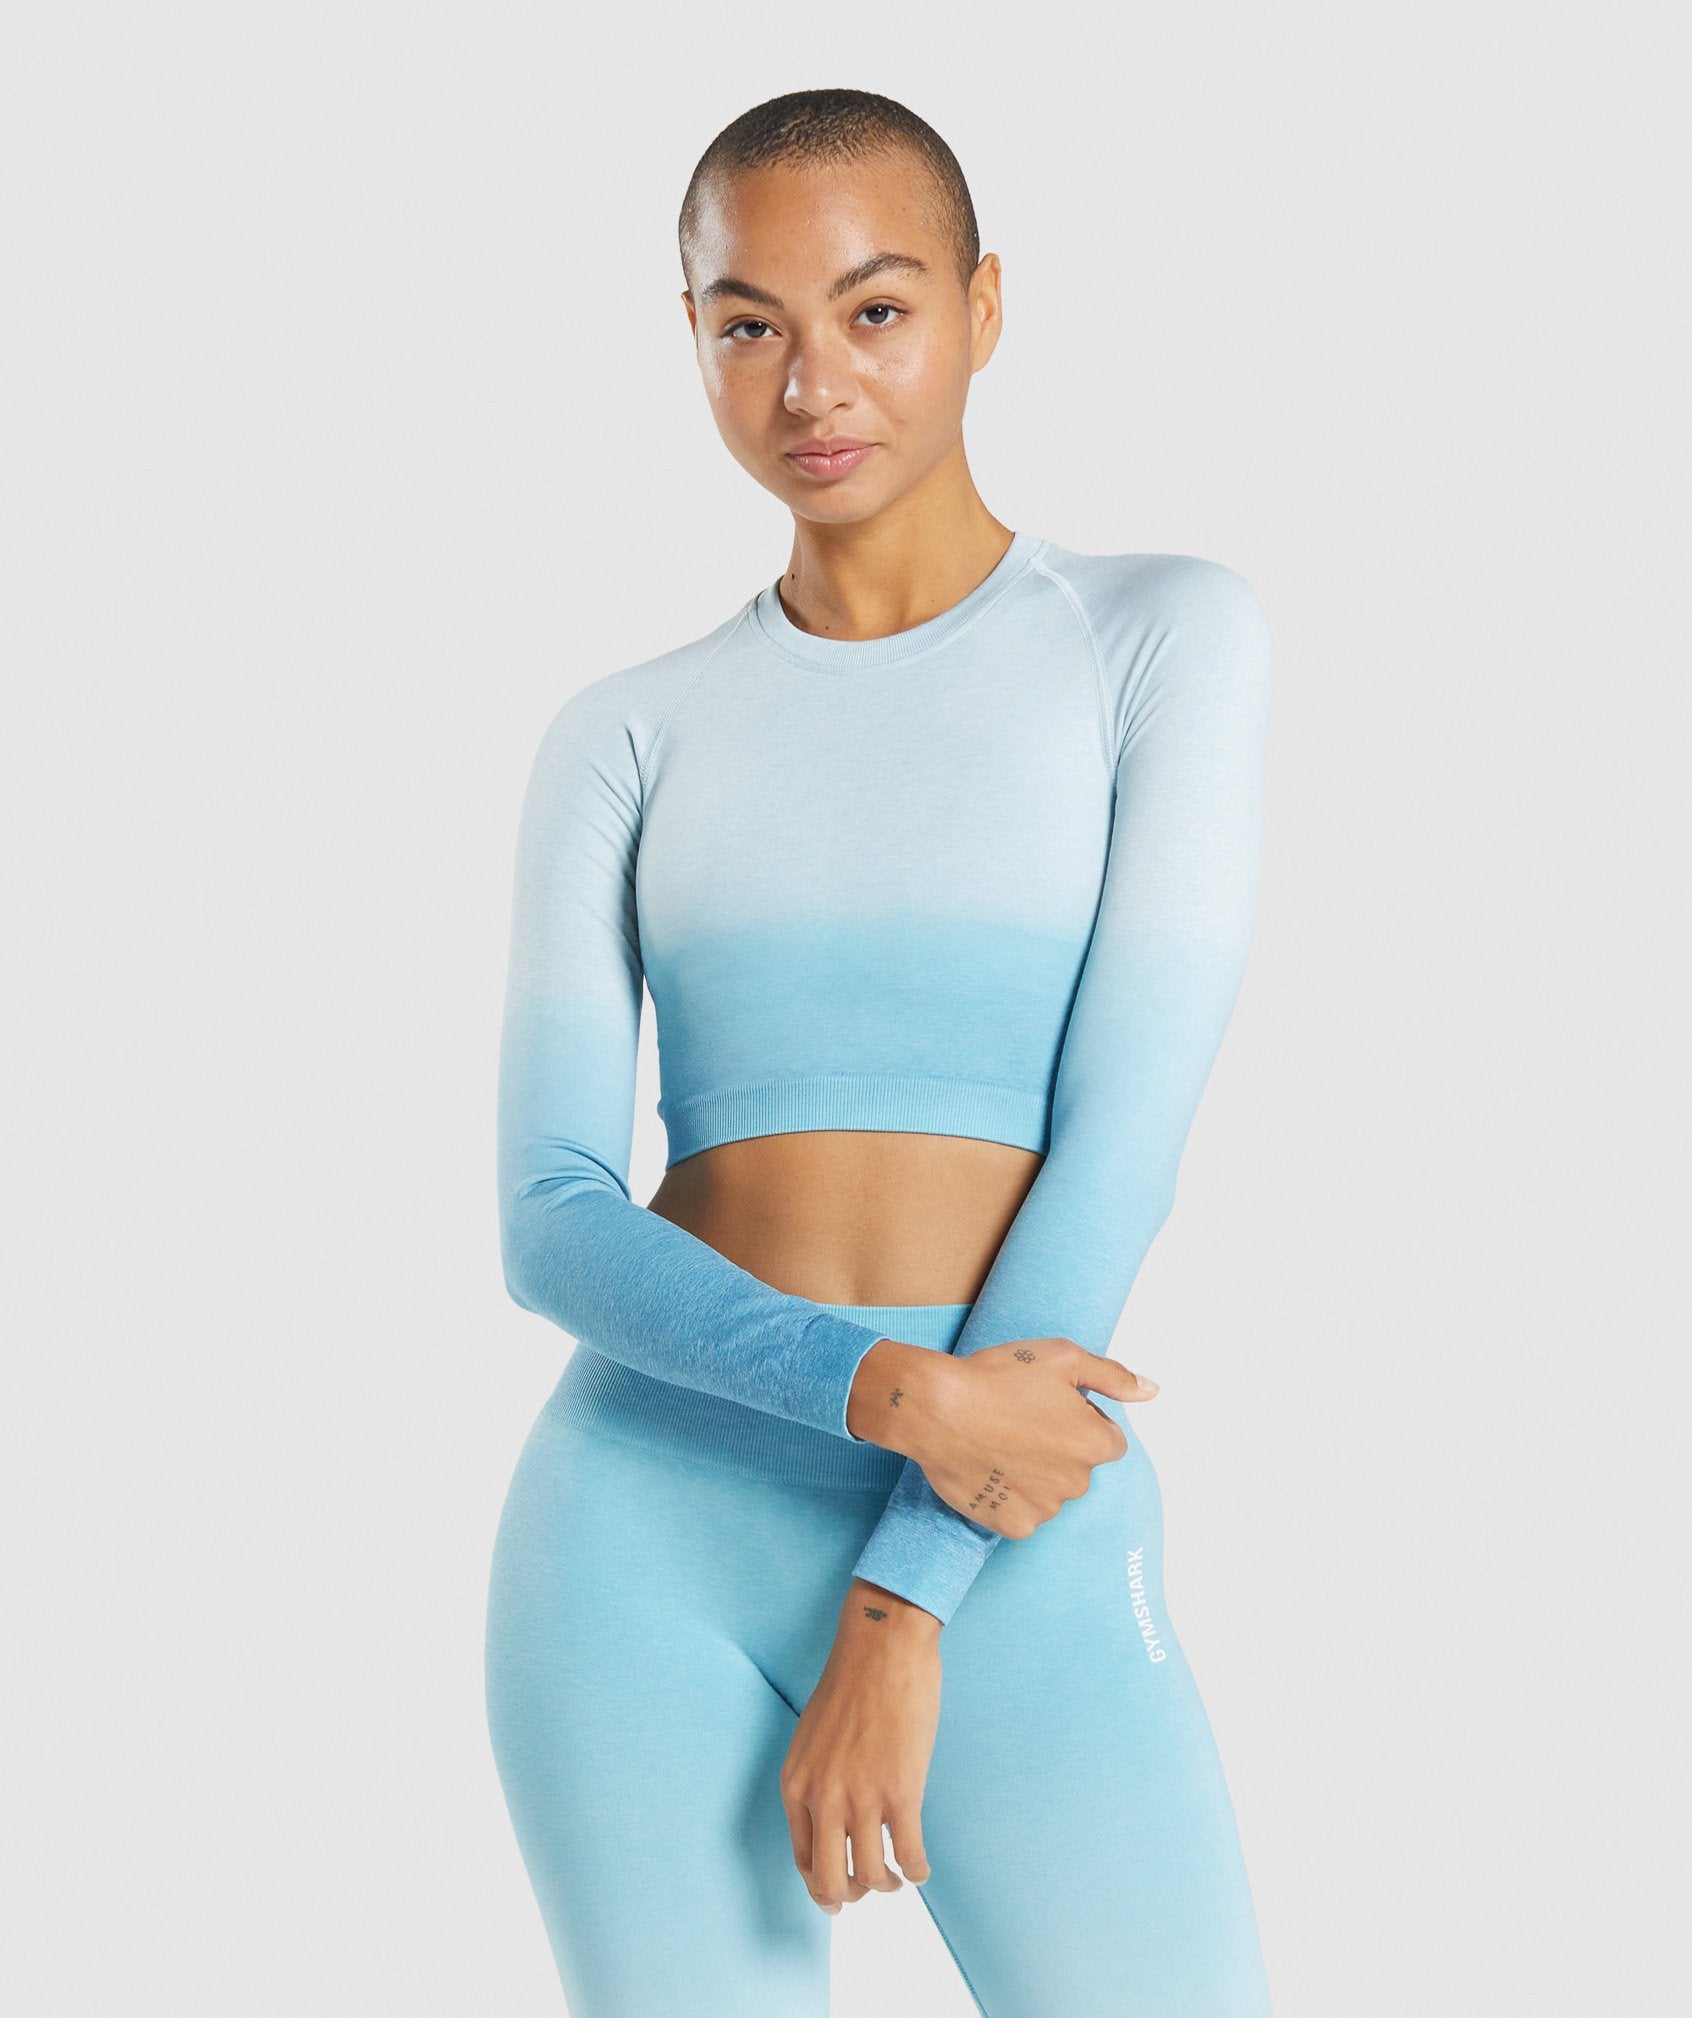 GYMSHARK OMBRE SEAMLESS, IN DEPTH REVIEW